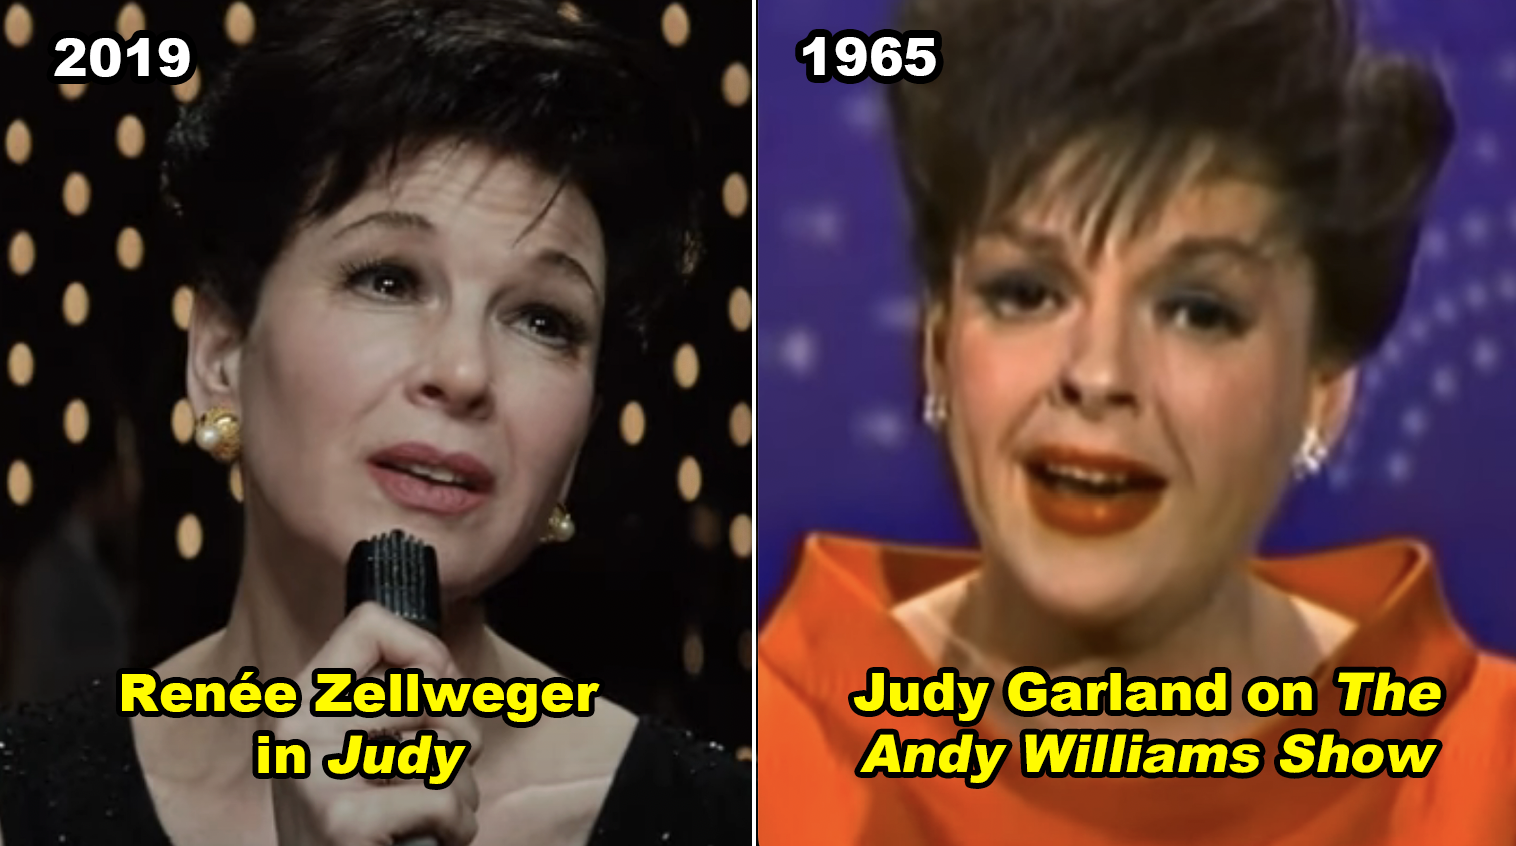 A side-by-side of Renée in &quot;Judy&quot; vs. Judy Garland on &quot;The Andy Williams Show&quot; in 1965